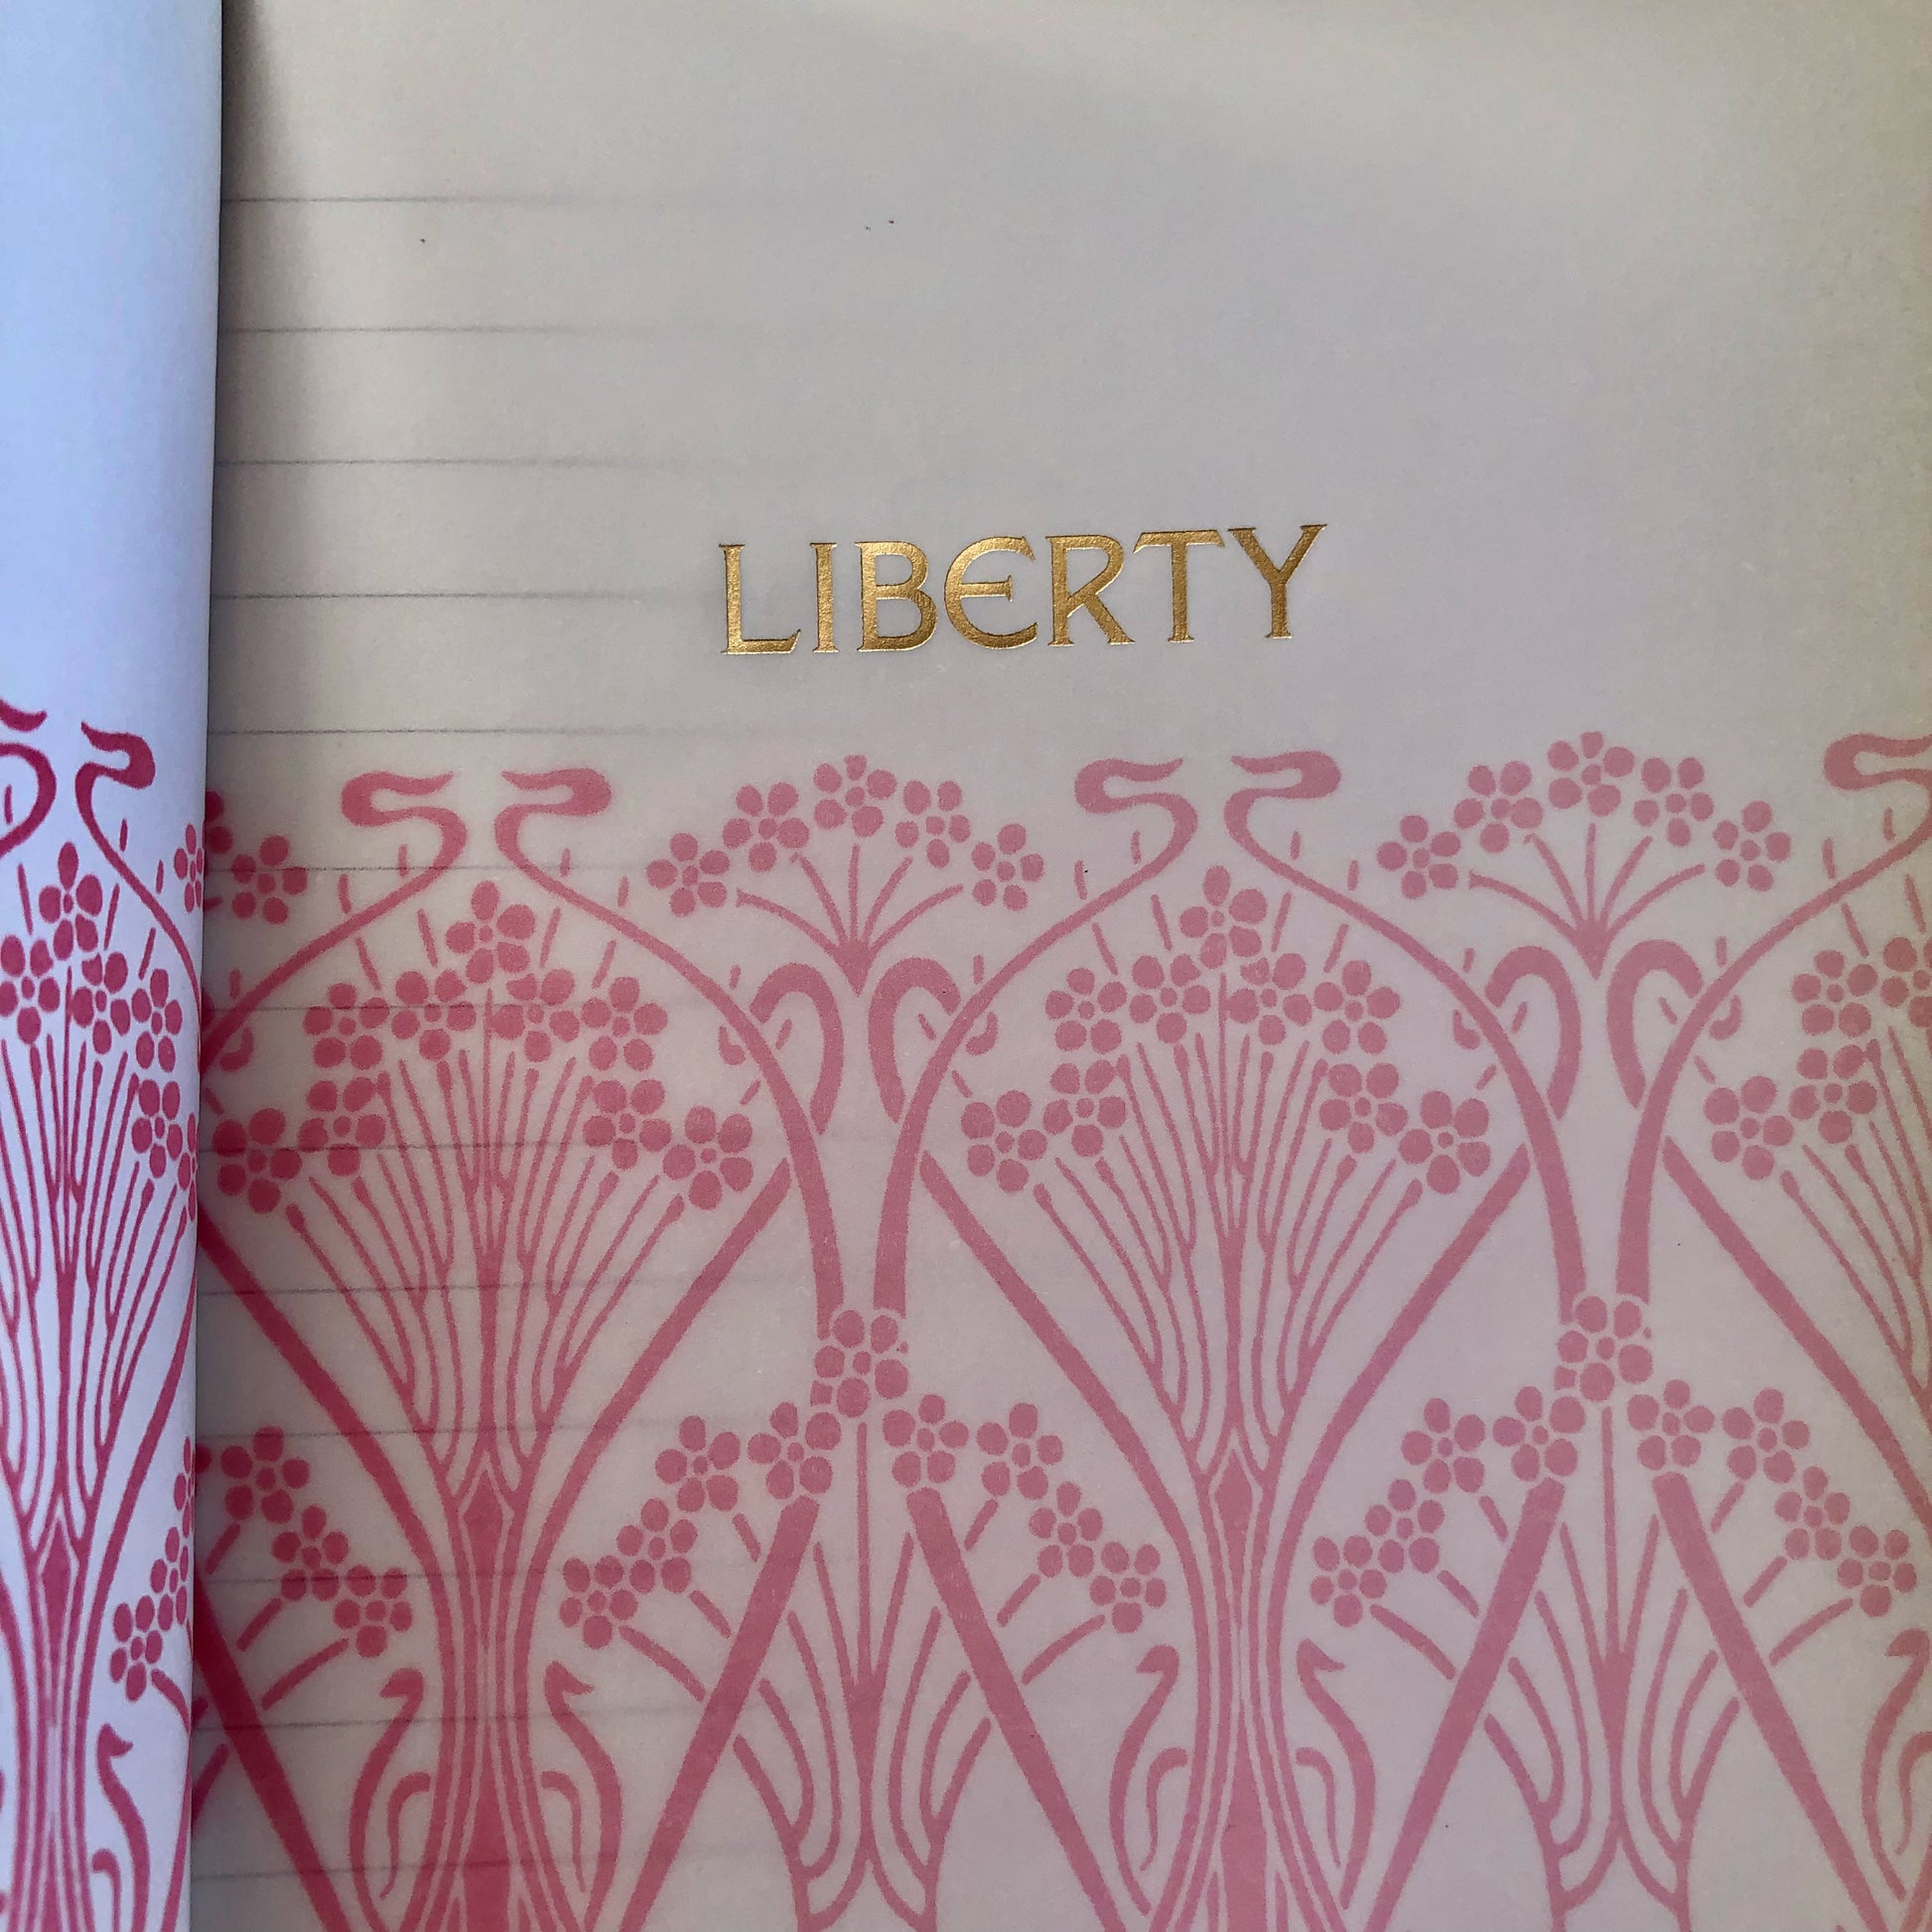 Liberty 'Stiches of Liberty Small A6 Hardbound Notebook - Isabel Harris